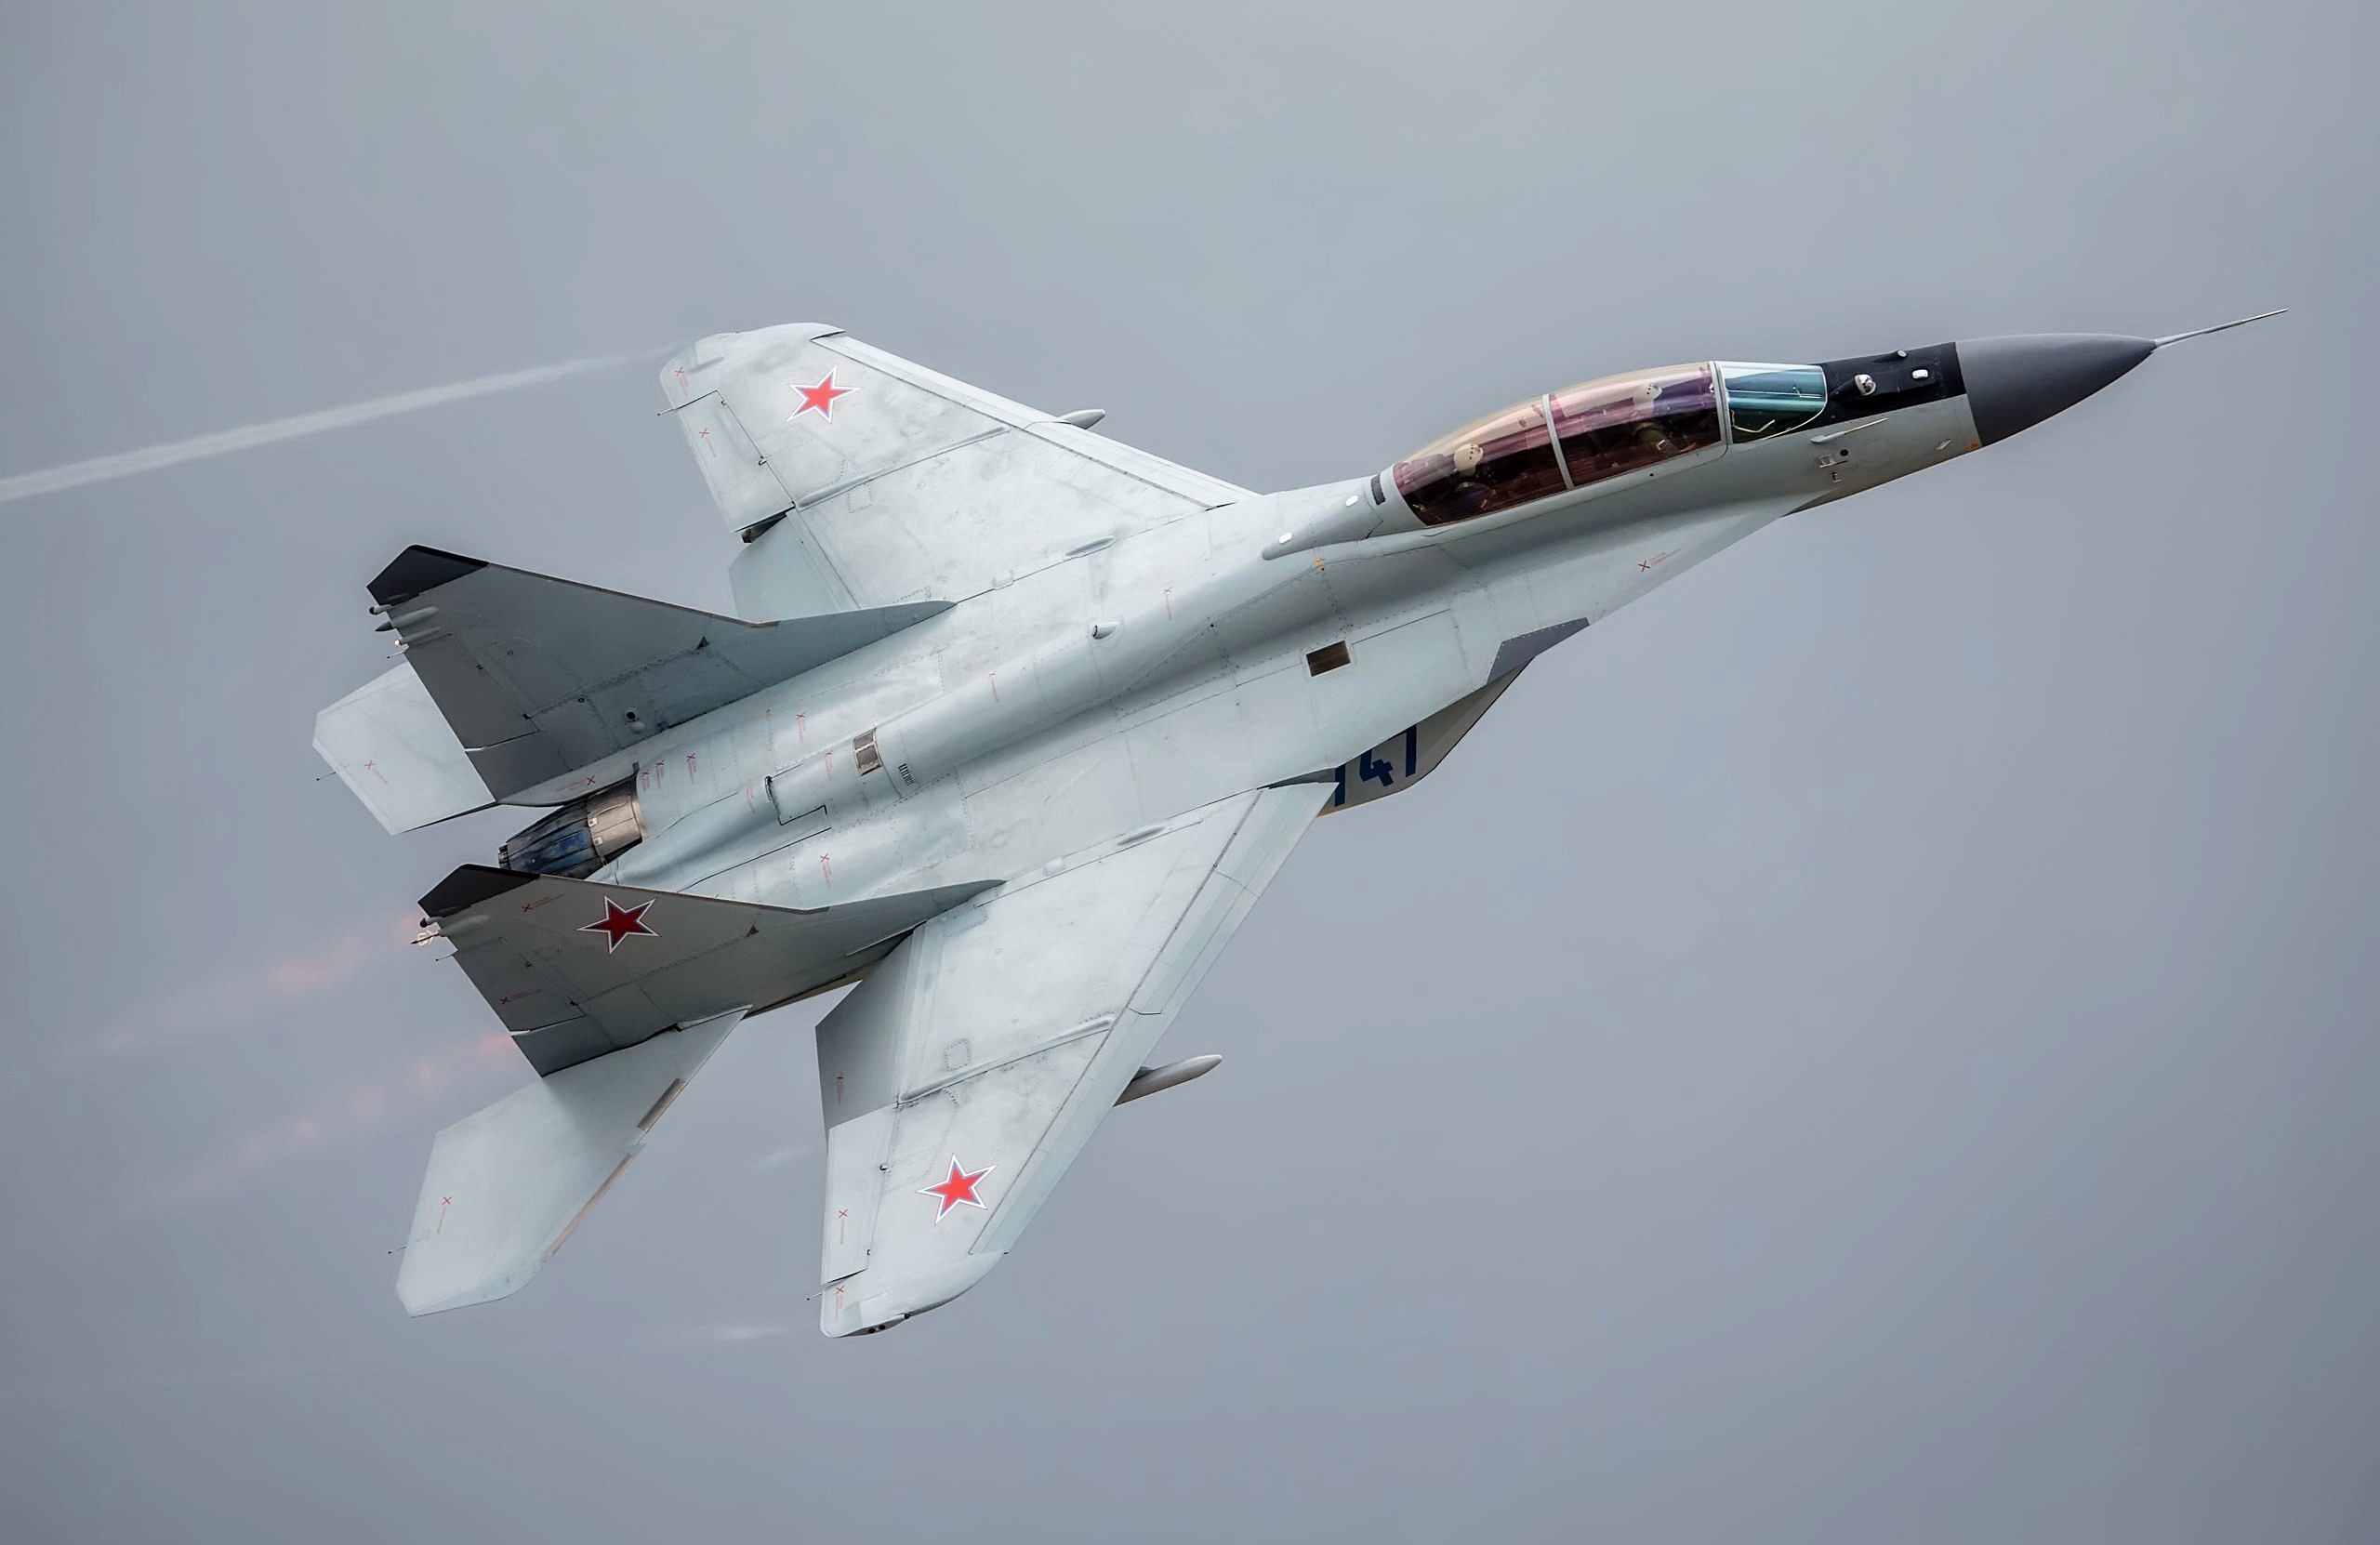 Military Mikoyan MiG-35 HD Wallpaper | Background Image